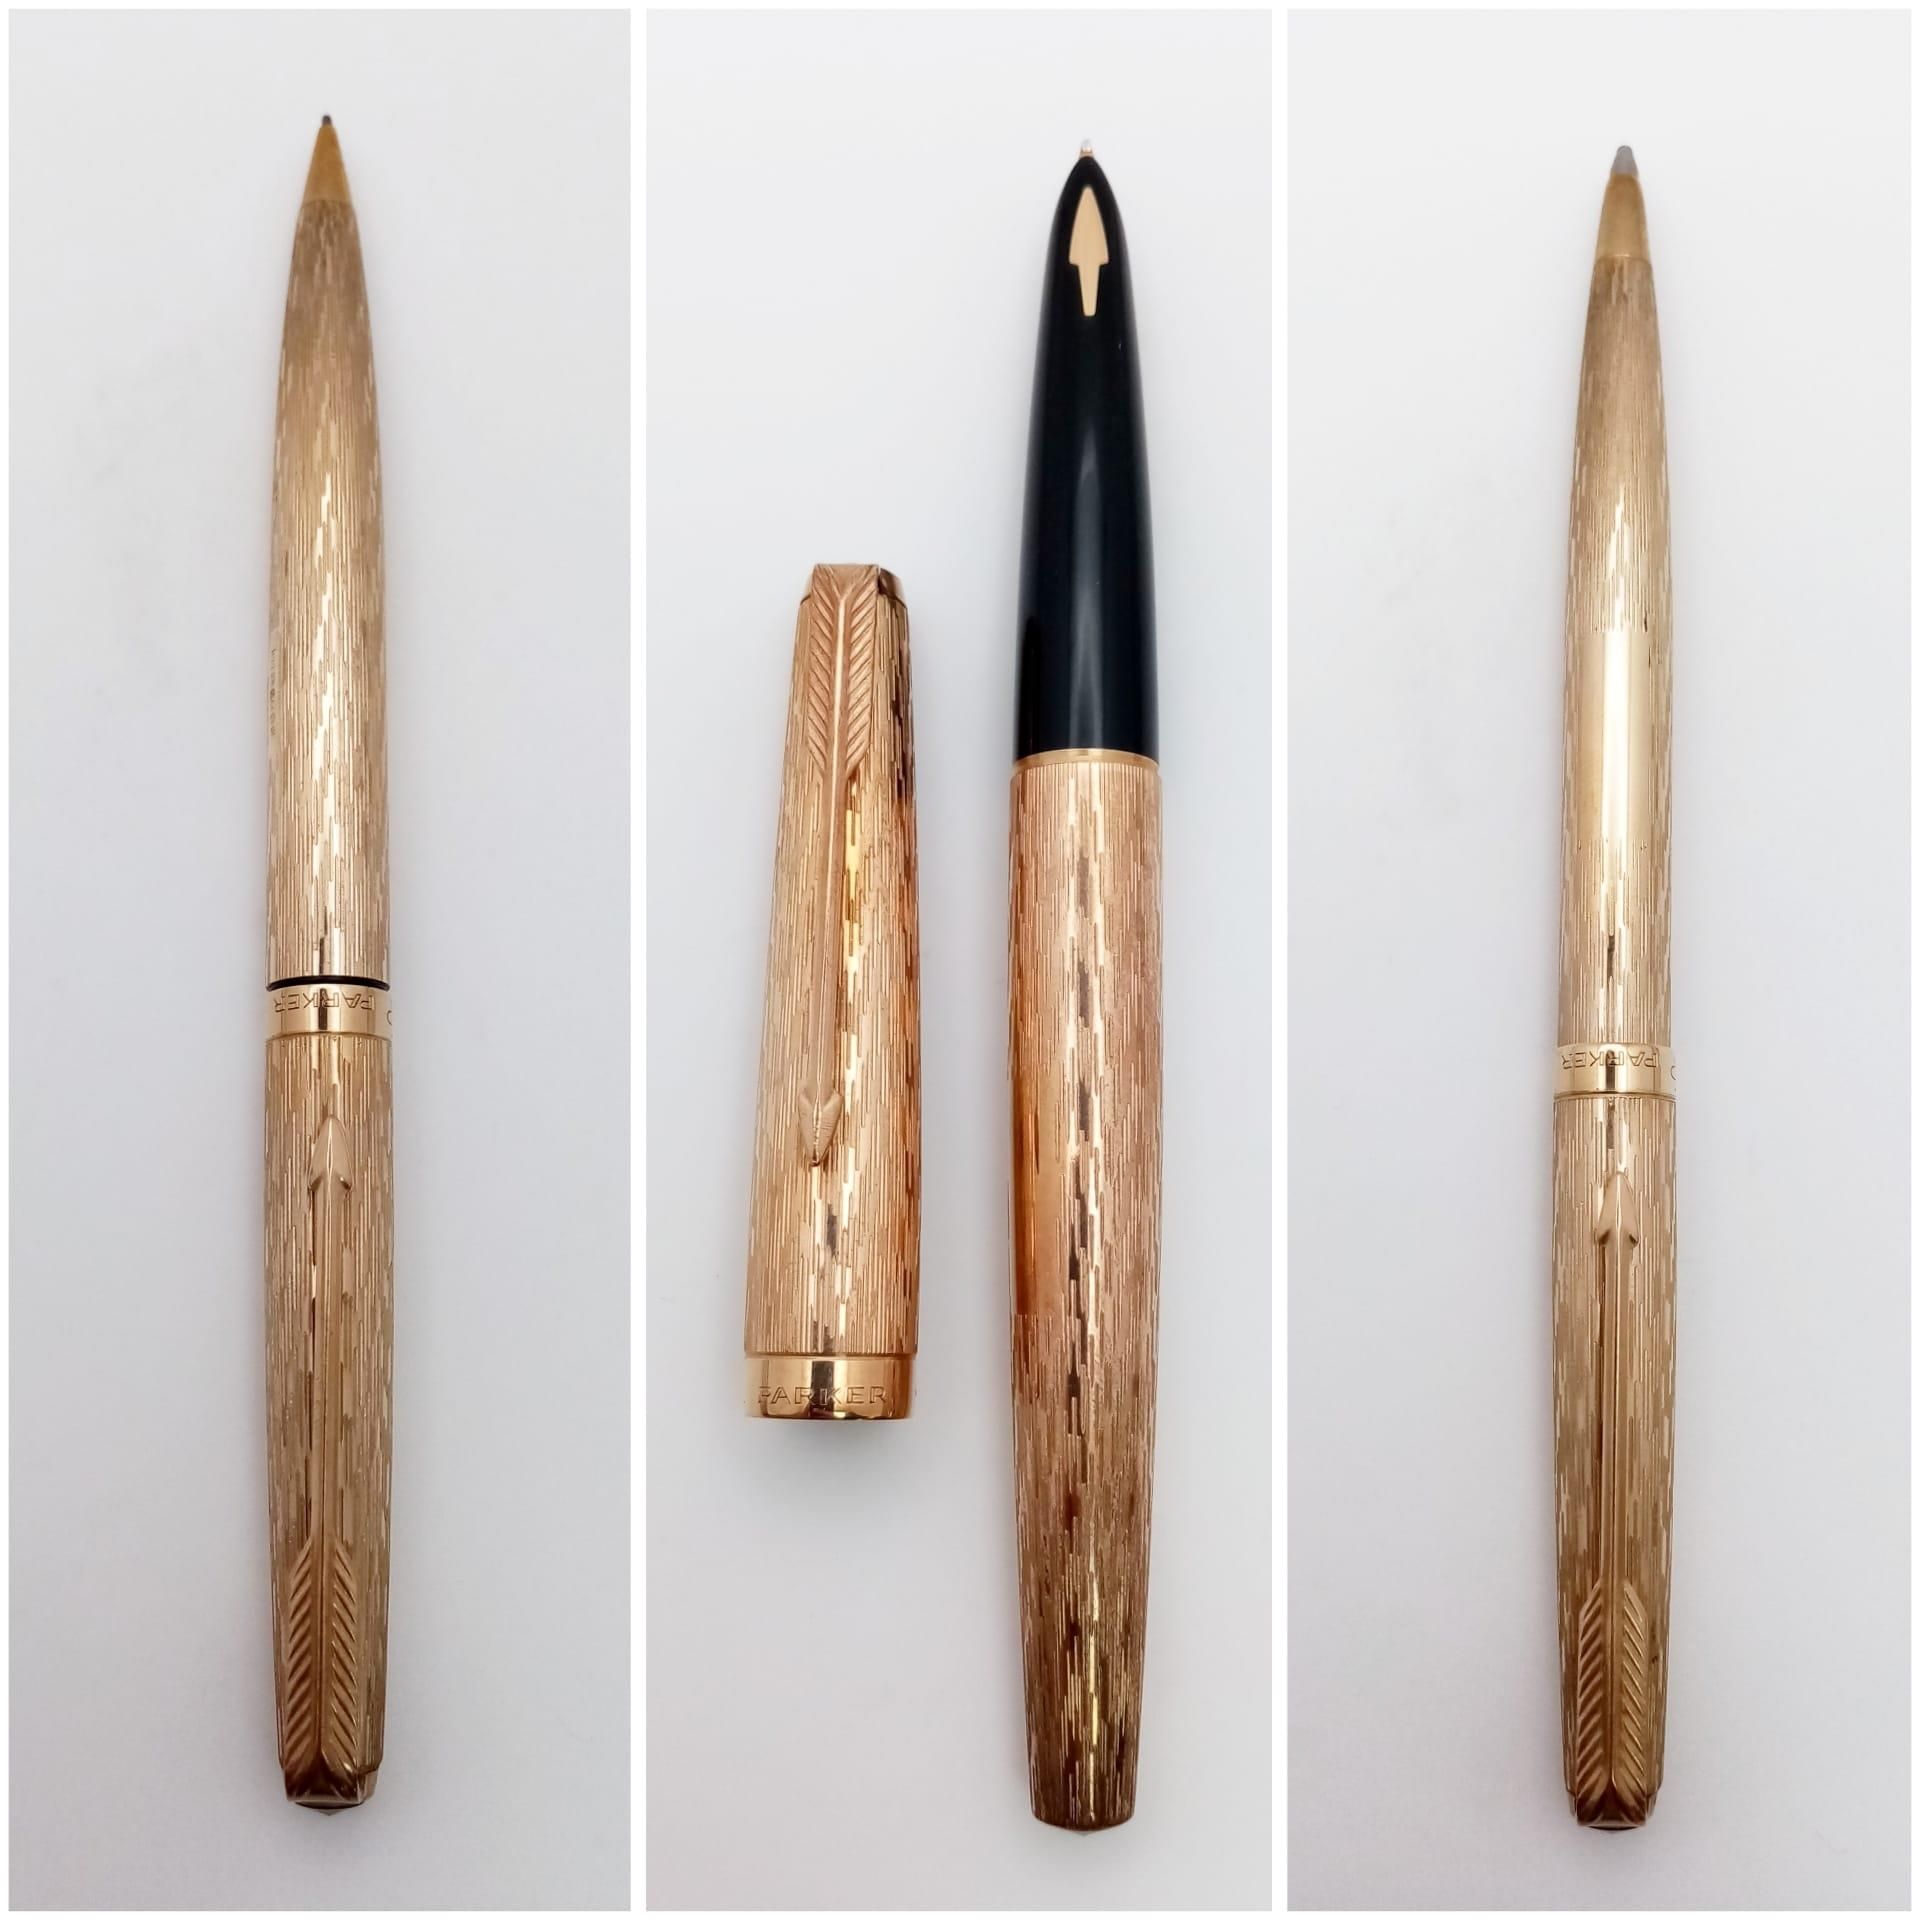 A Wonderful Parker Pen 9K Gold Writing Set. Fountain, ballpoint and pencil in decorative bark-effect